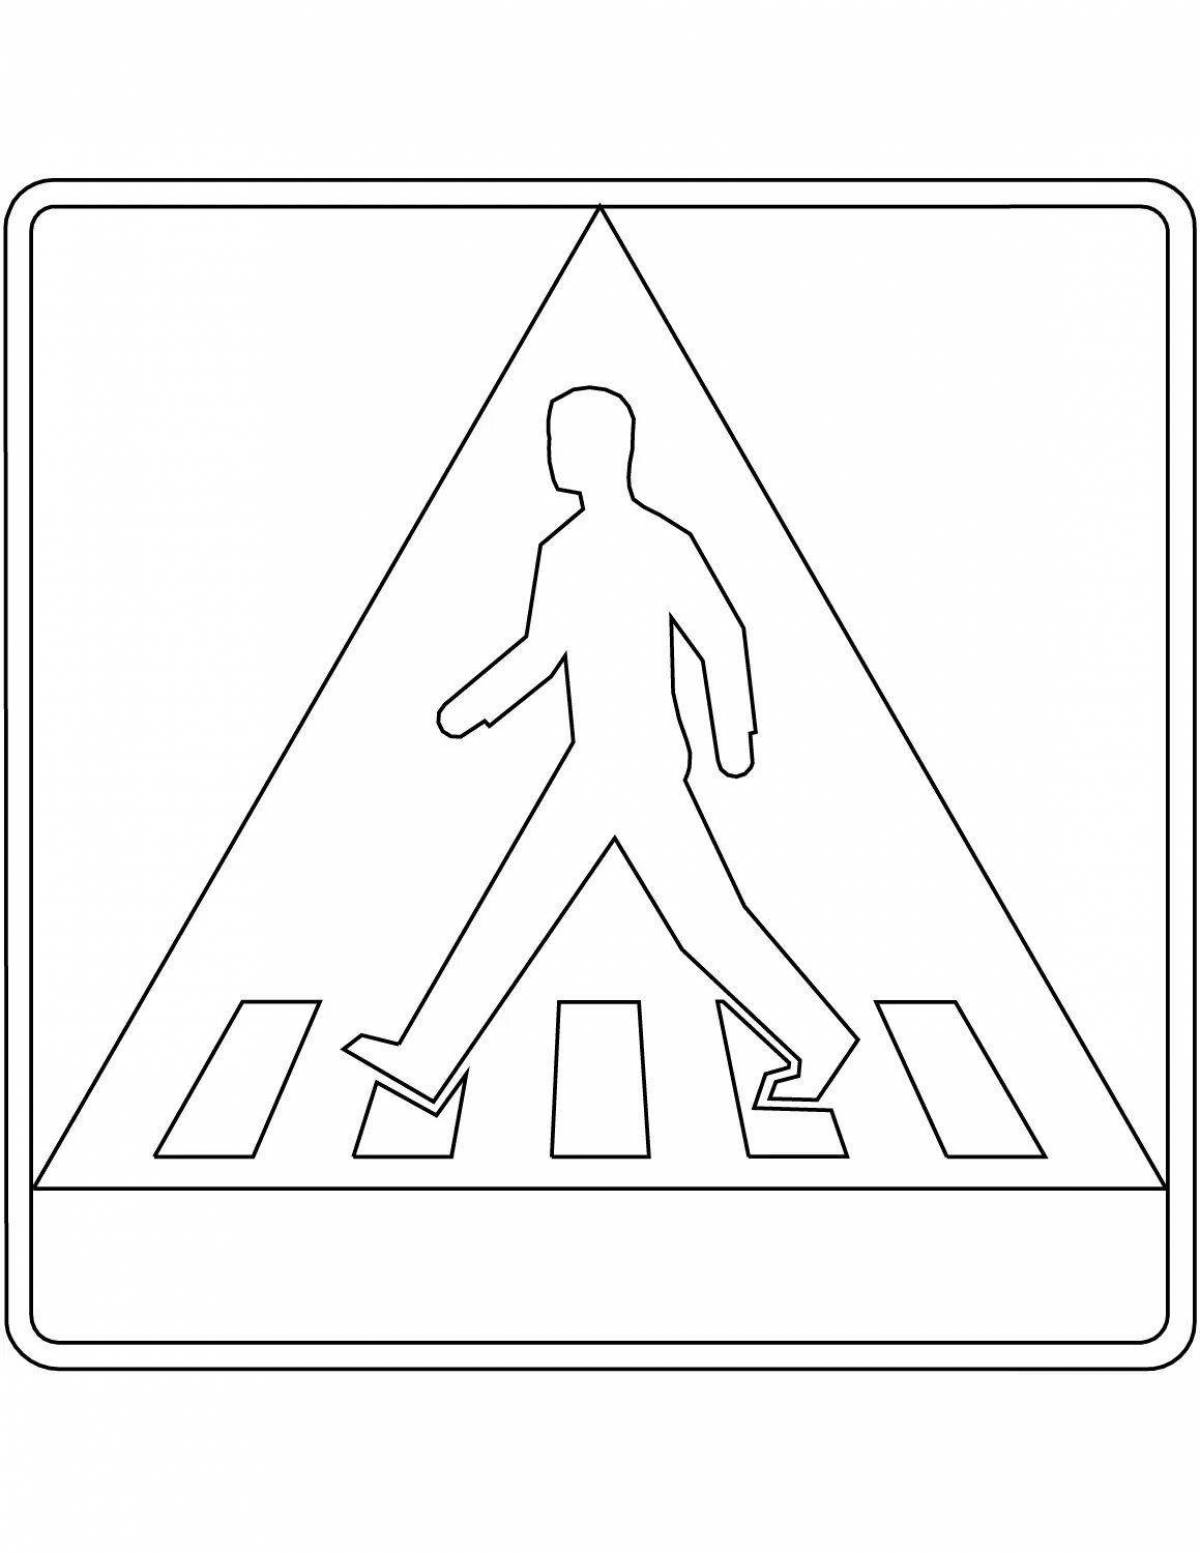 Conspicuously dazzling traffic sign for pedestrians